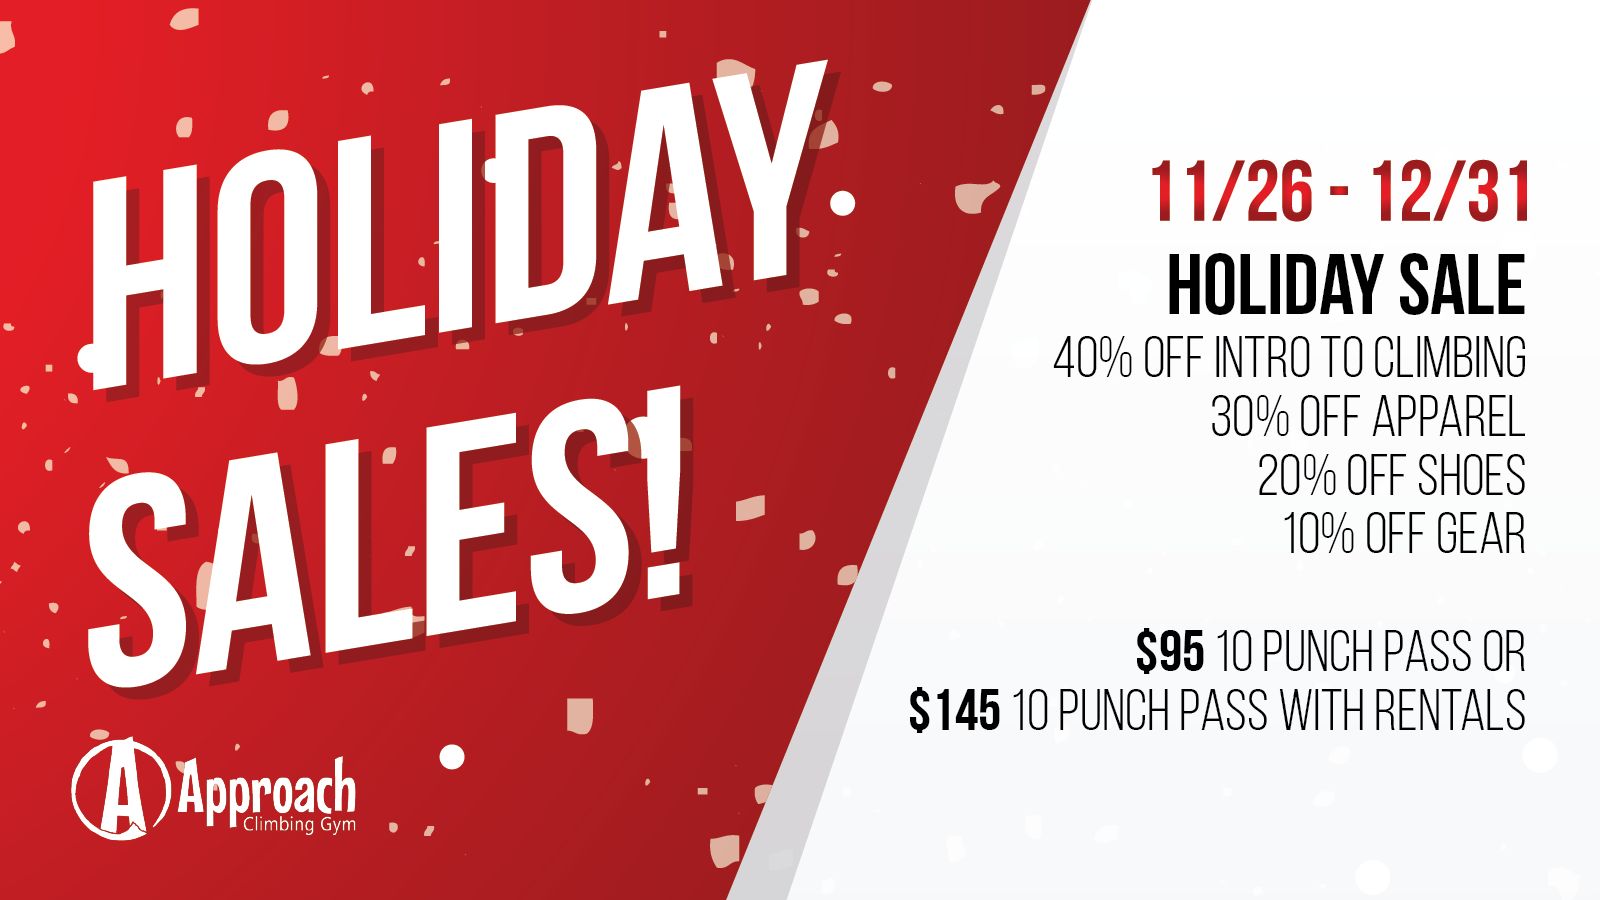 Holiday Sales Event